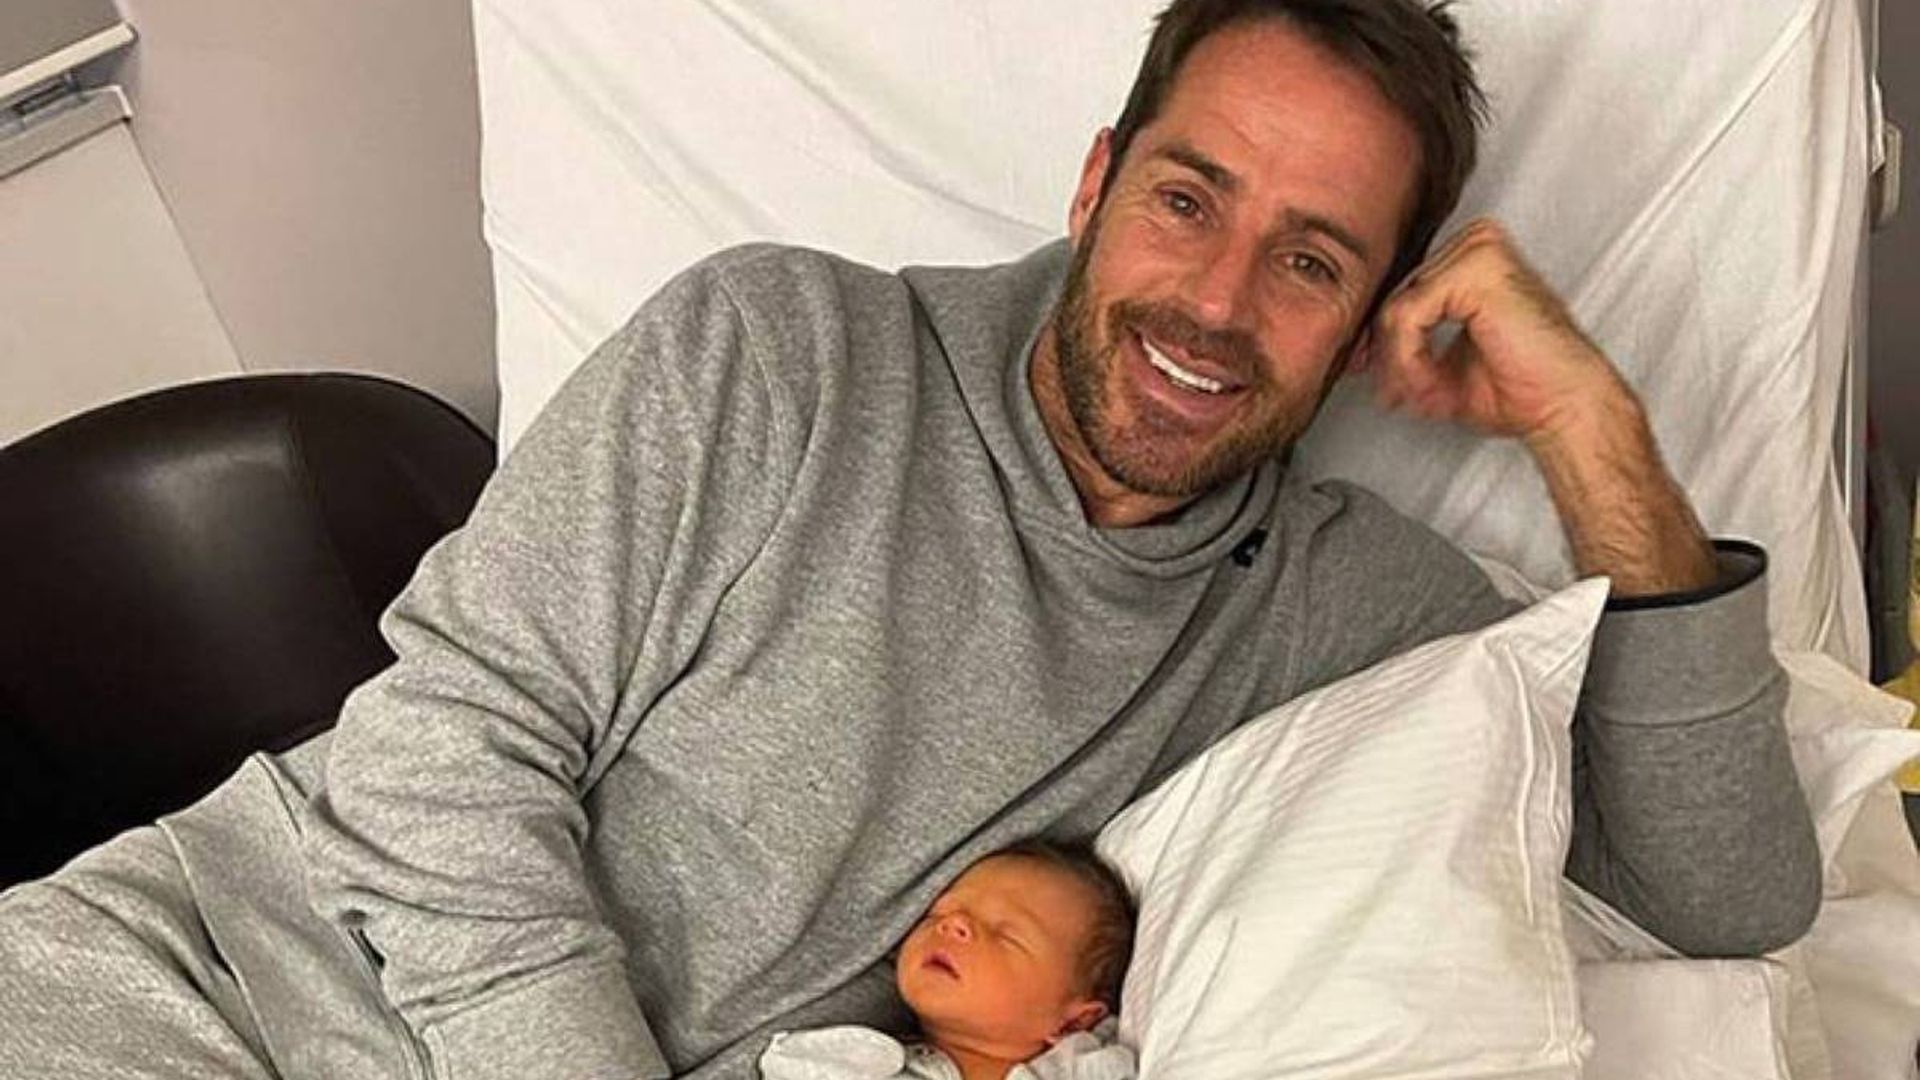 Jamie Redknapp shares adorable photo with newborn son Raphael - and he's already taking after his dad!